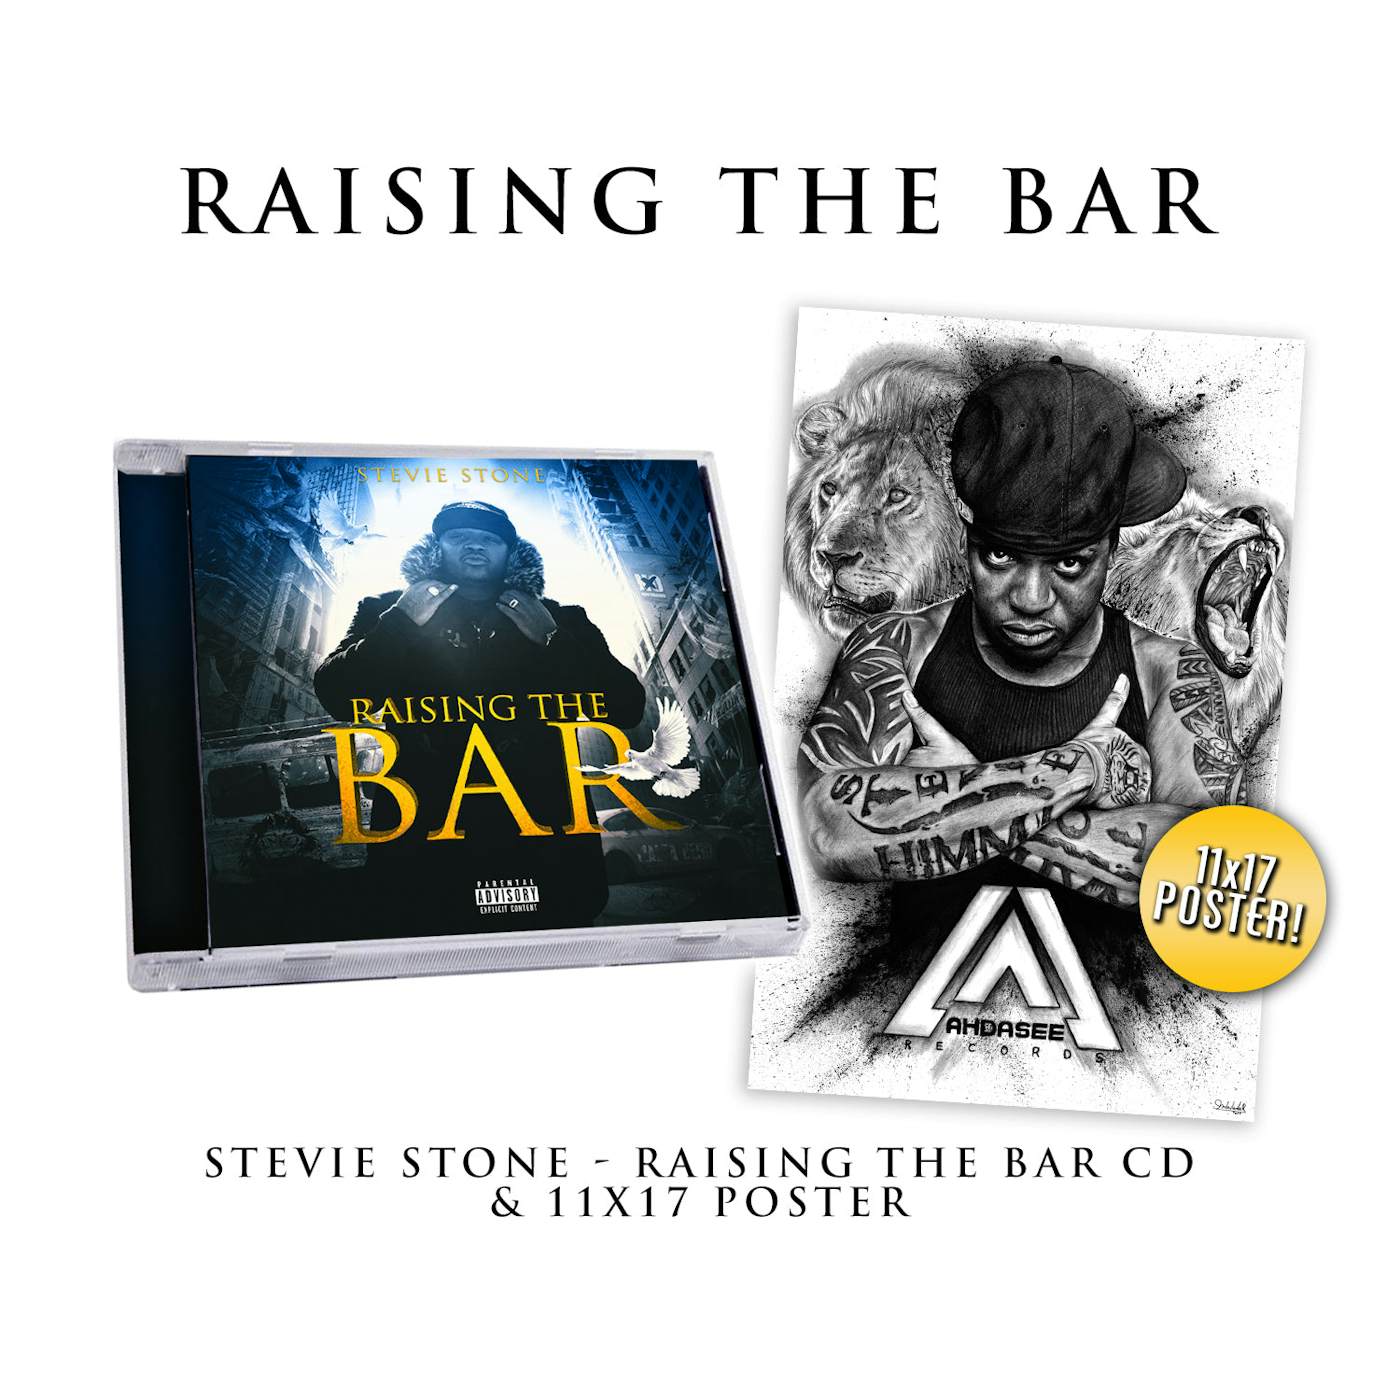 Stevie Stone "Raising the Bar" CD and Poster Autographed Bundle